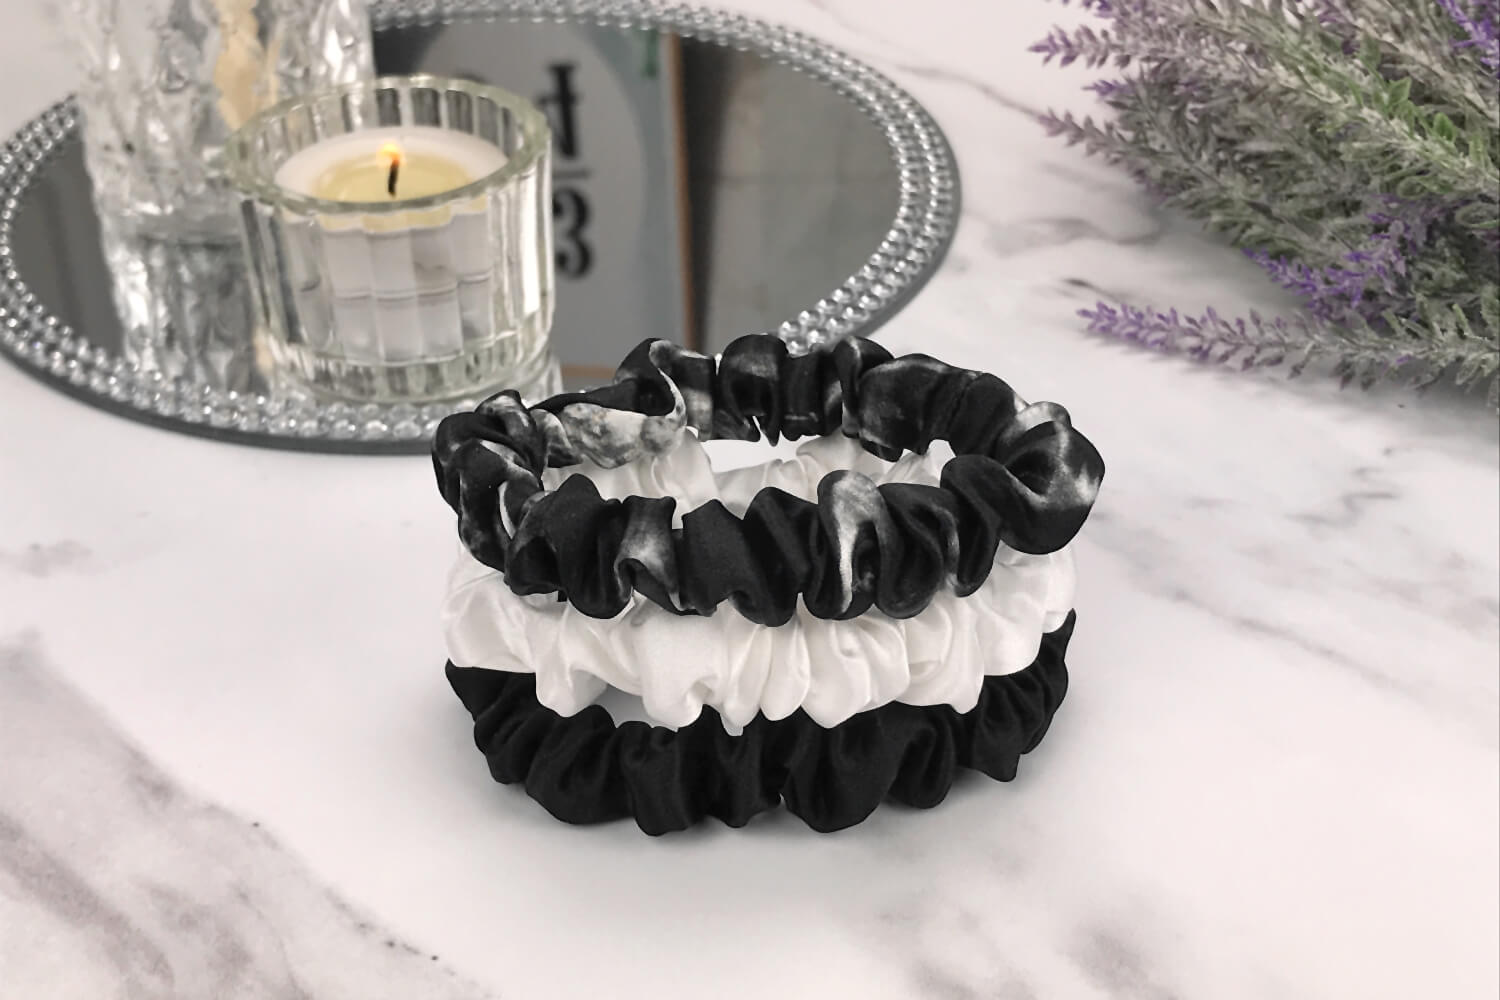 Celestial Silk skinny black marble black and ivory silk scrunchies stacked on marble counter with lavender plant and a candle in the background